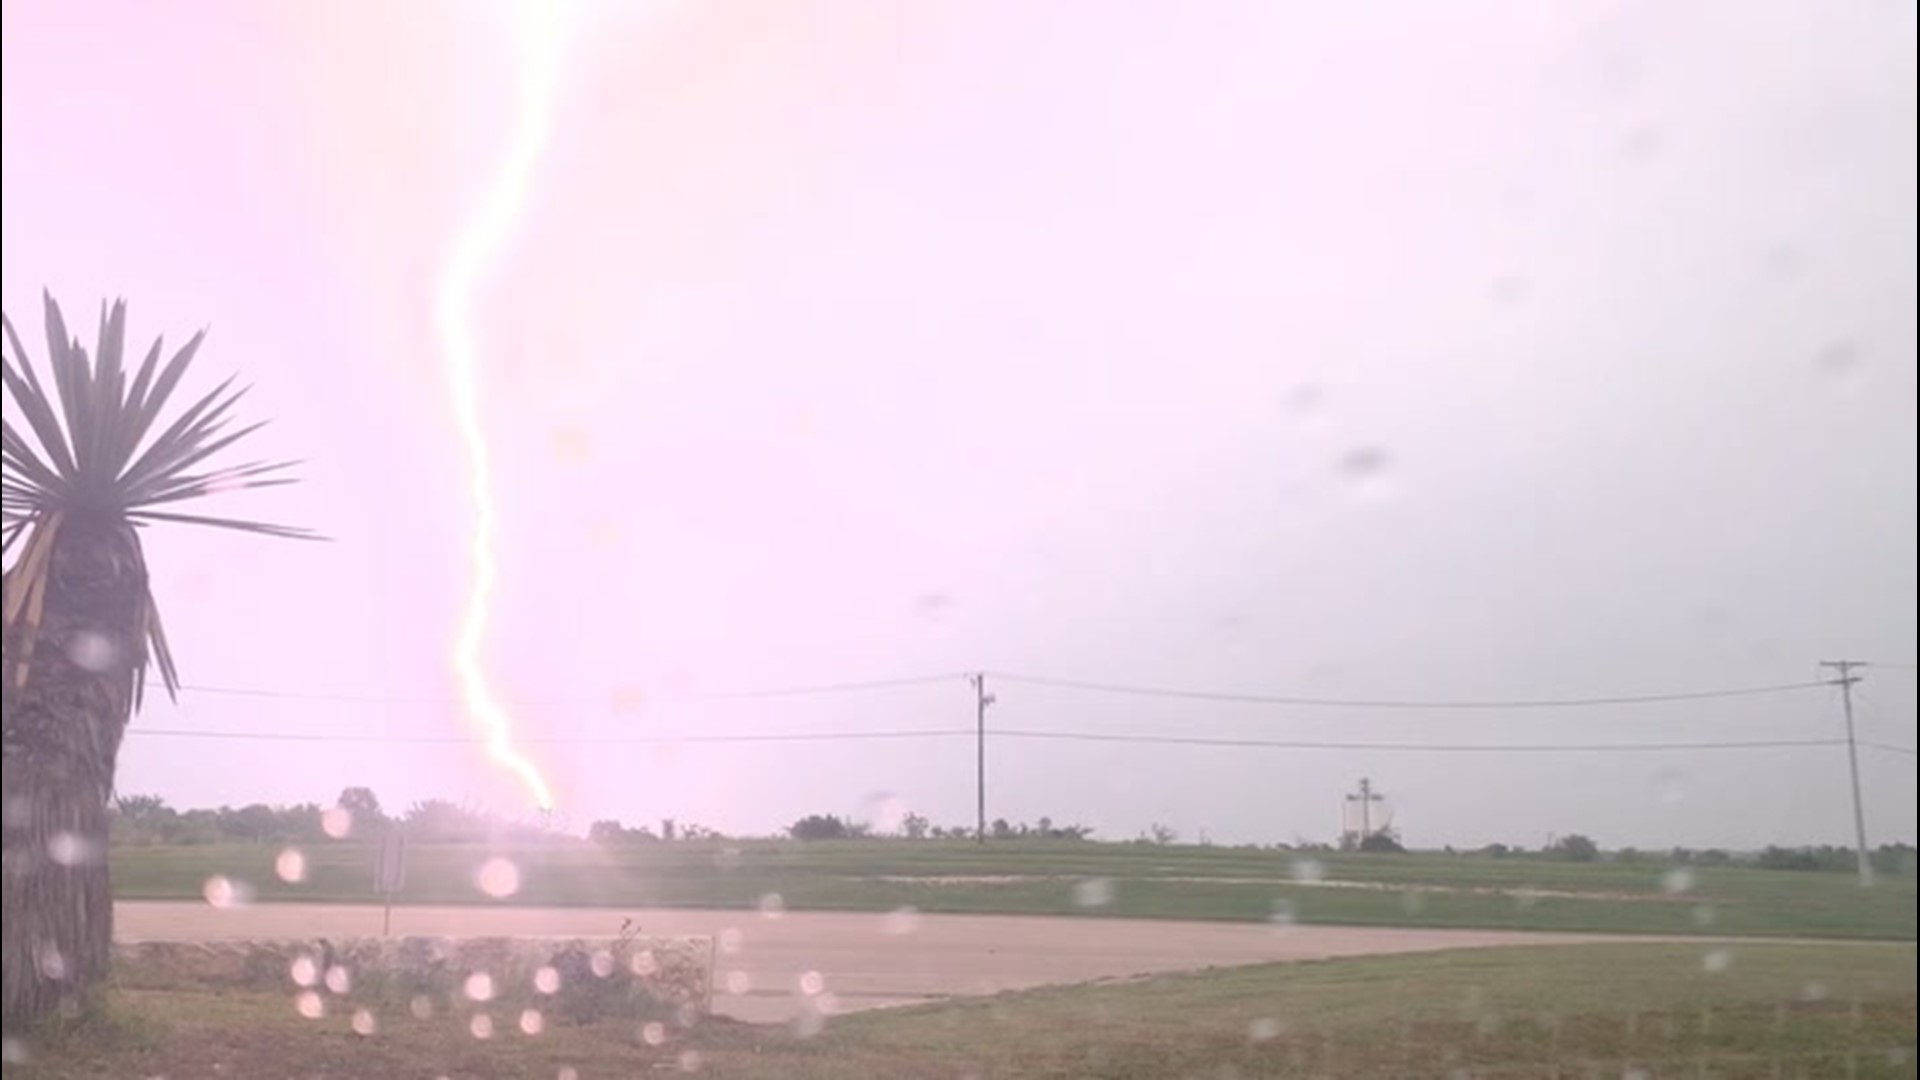 On April 9, thunderstorms in Temple, Texas, sent lightning crashing to the ground. Here's one bolt slowed down to 50% and then 25% speed.